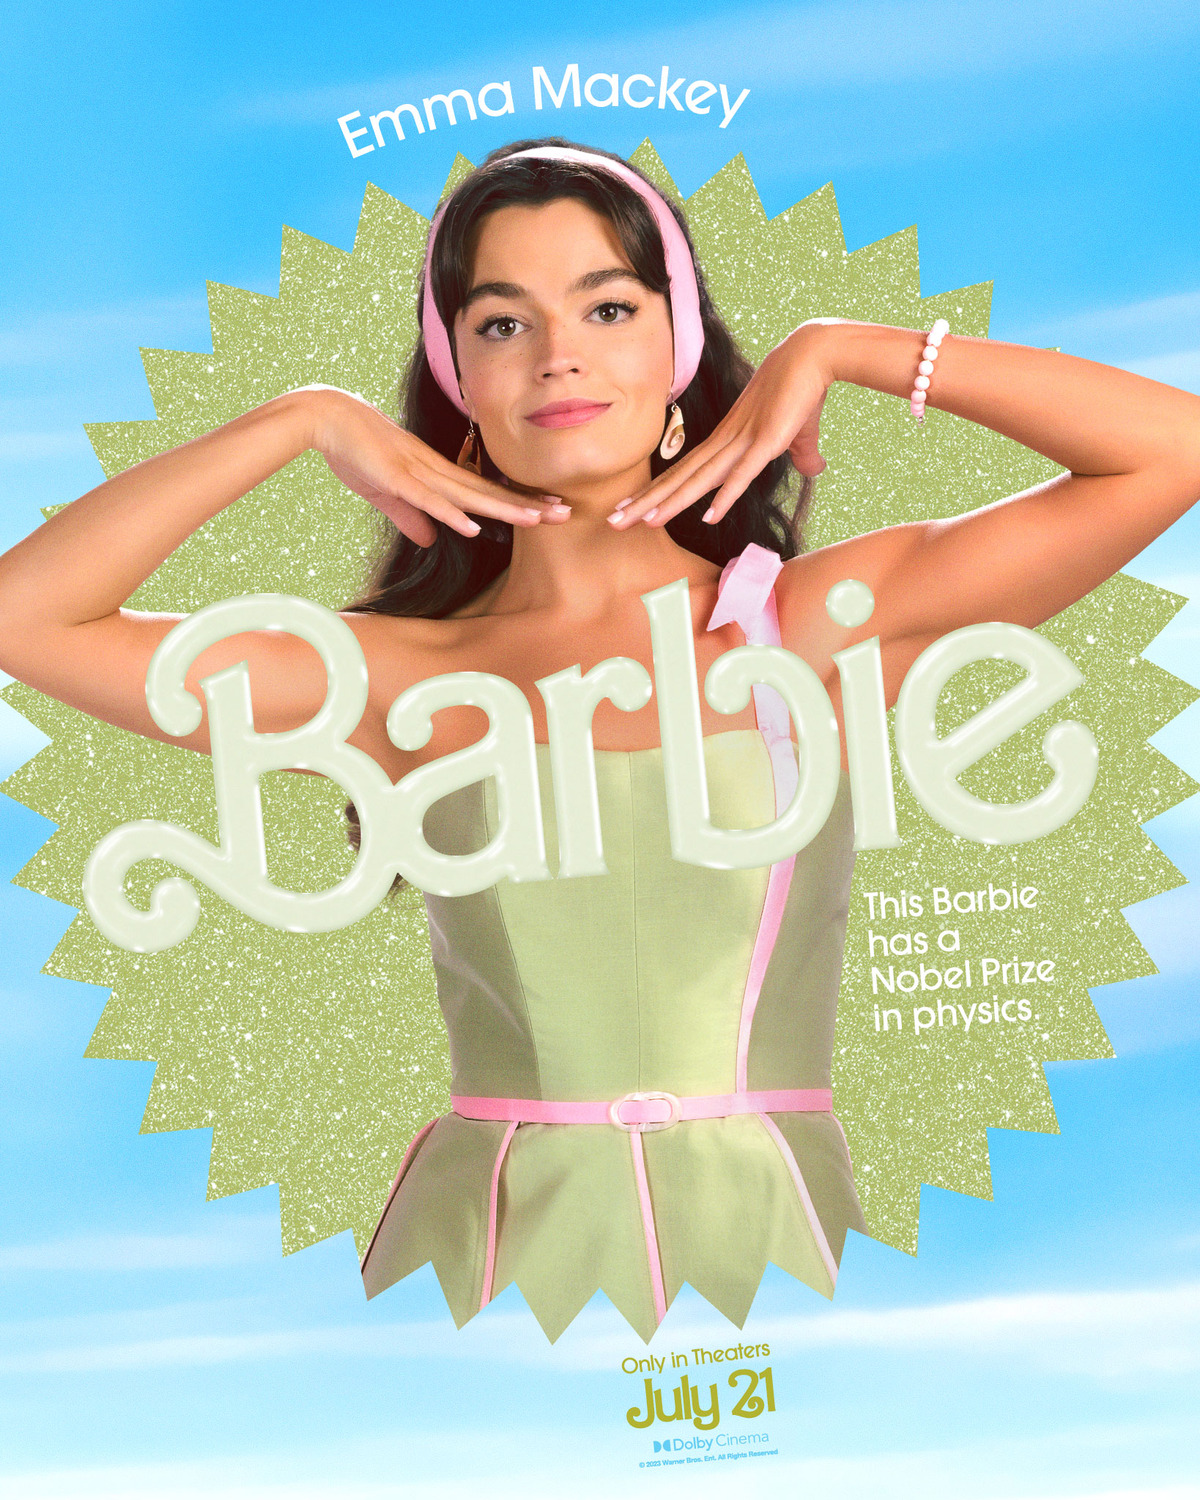 Extra Large Movie Poster Image for Barbie (#17 of 34)